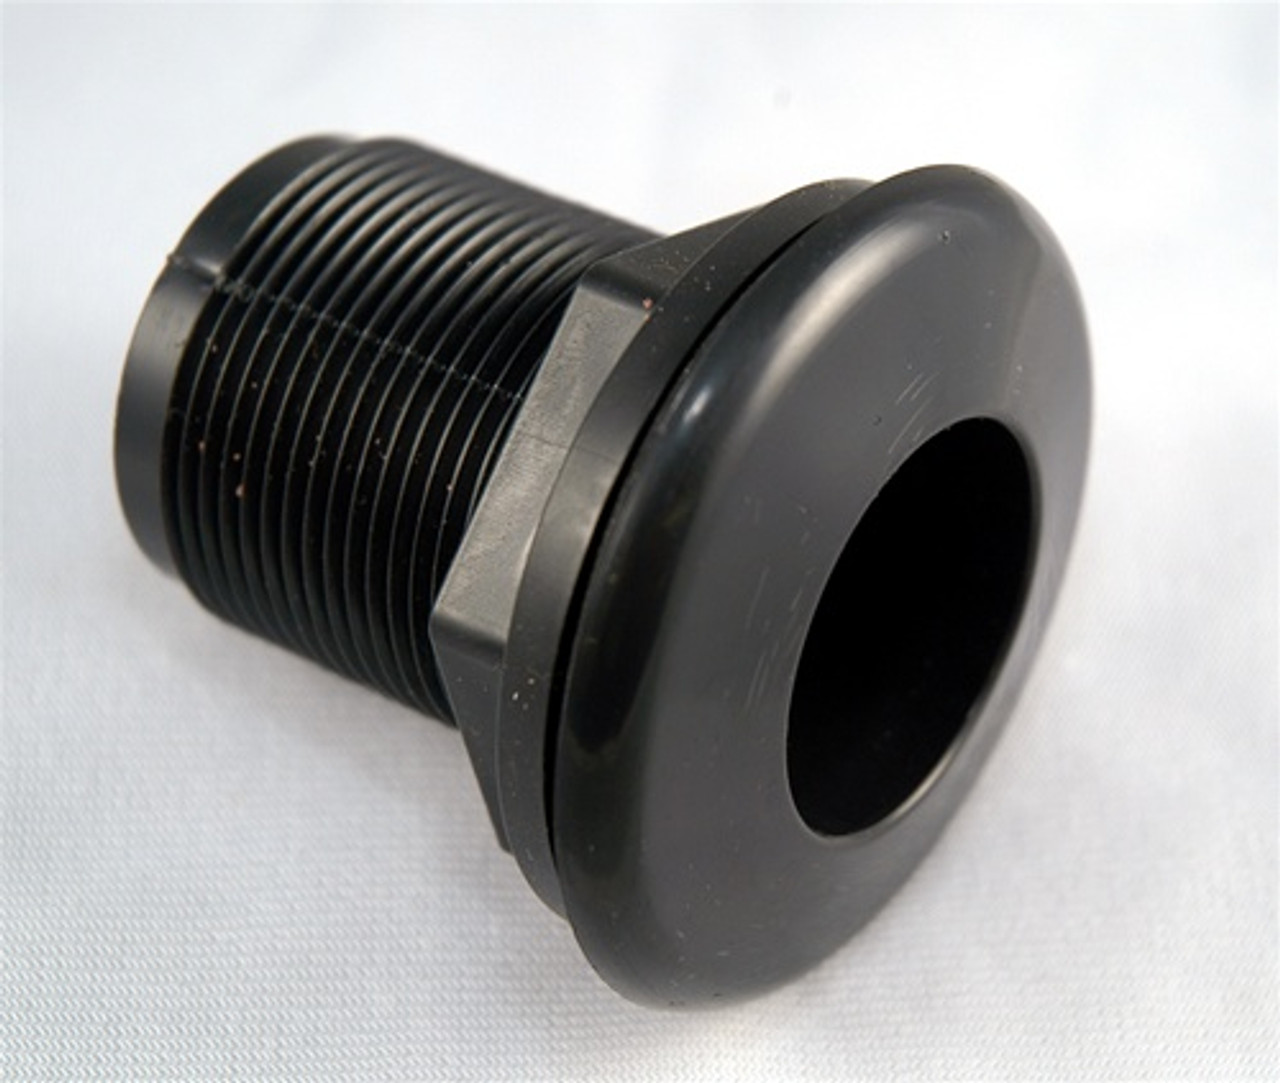 3/4 FPT Bulkhead Fitting for 1-1/2 Hole